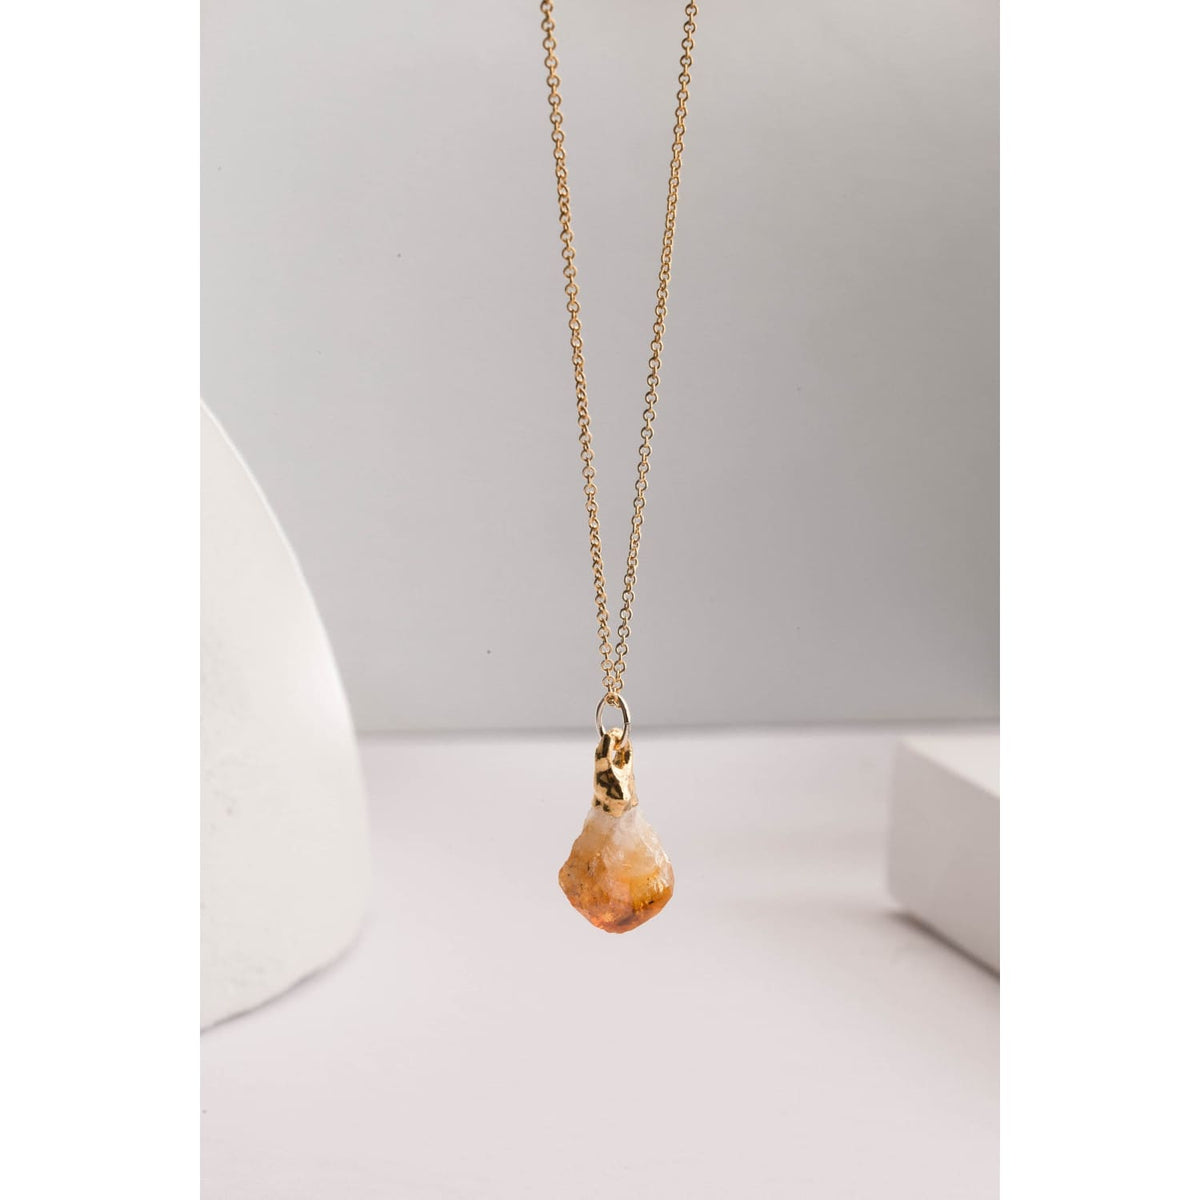 Large Raw Citrine Statement Necklace • Gold Filled